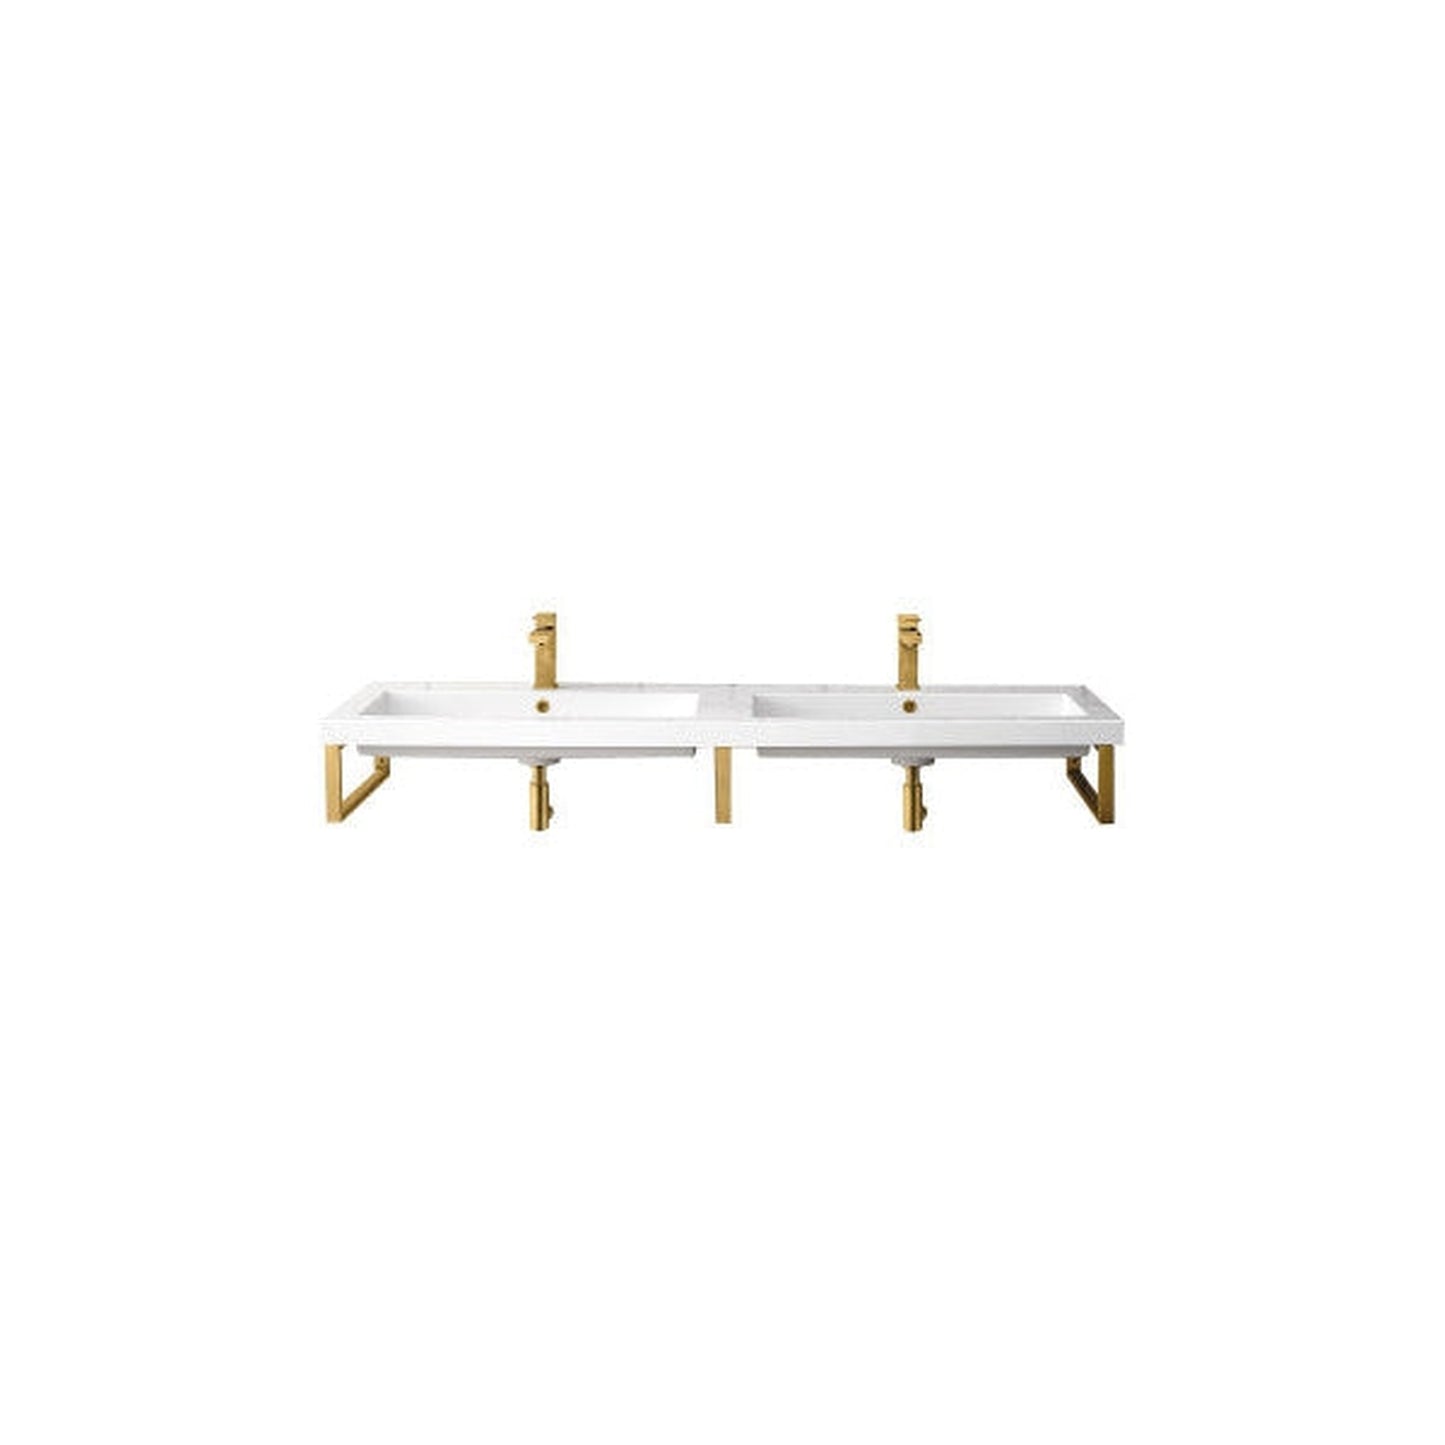 James Martin Boston 18" Three Radiant Gold Stainless Steel Wall Bracket With 63" White Glossy Composite Countertop